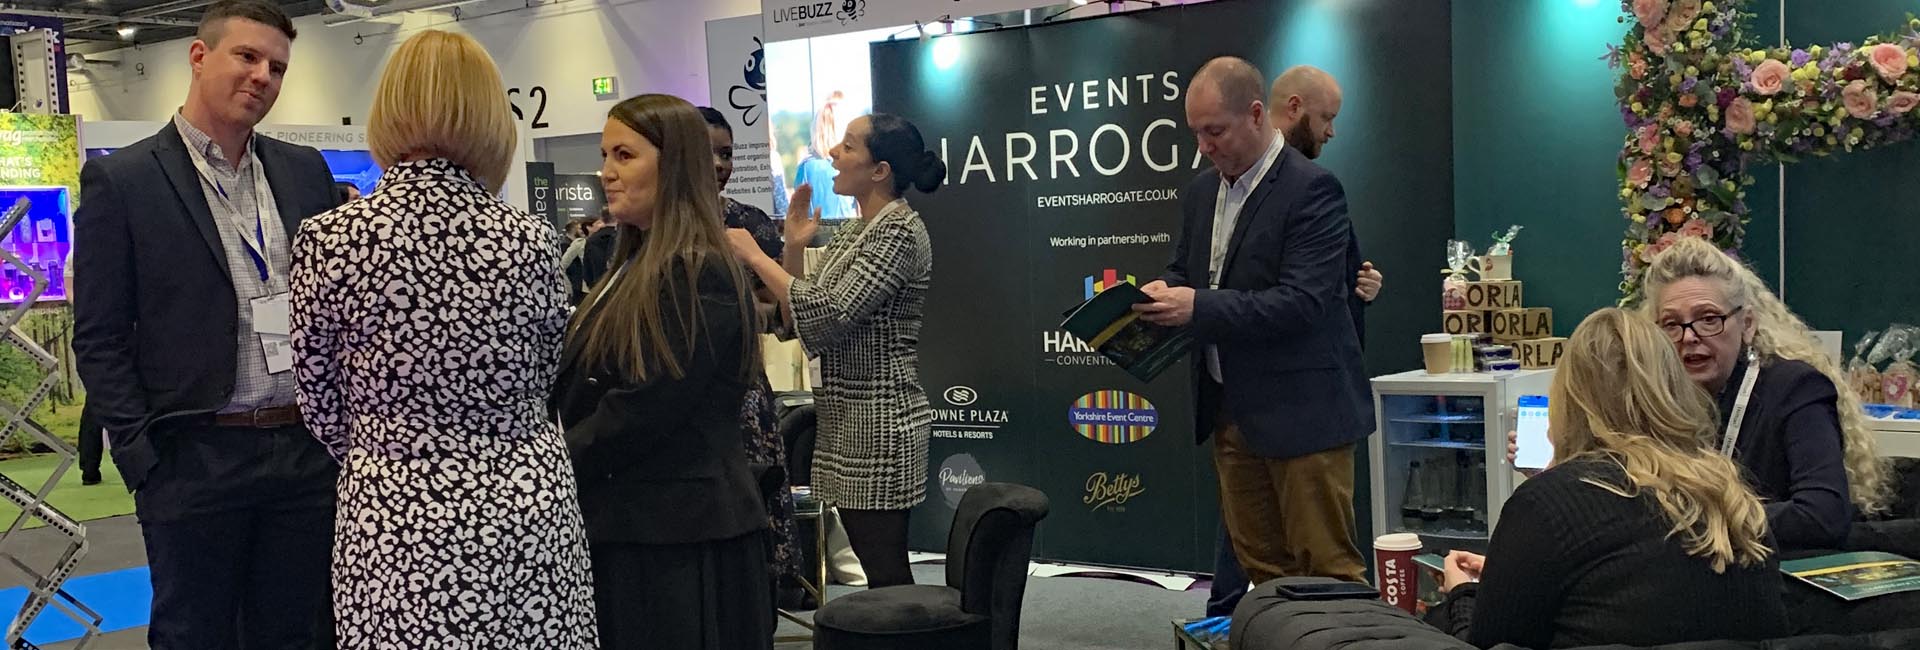 The Events Harrogate stand at international confex